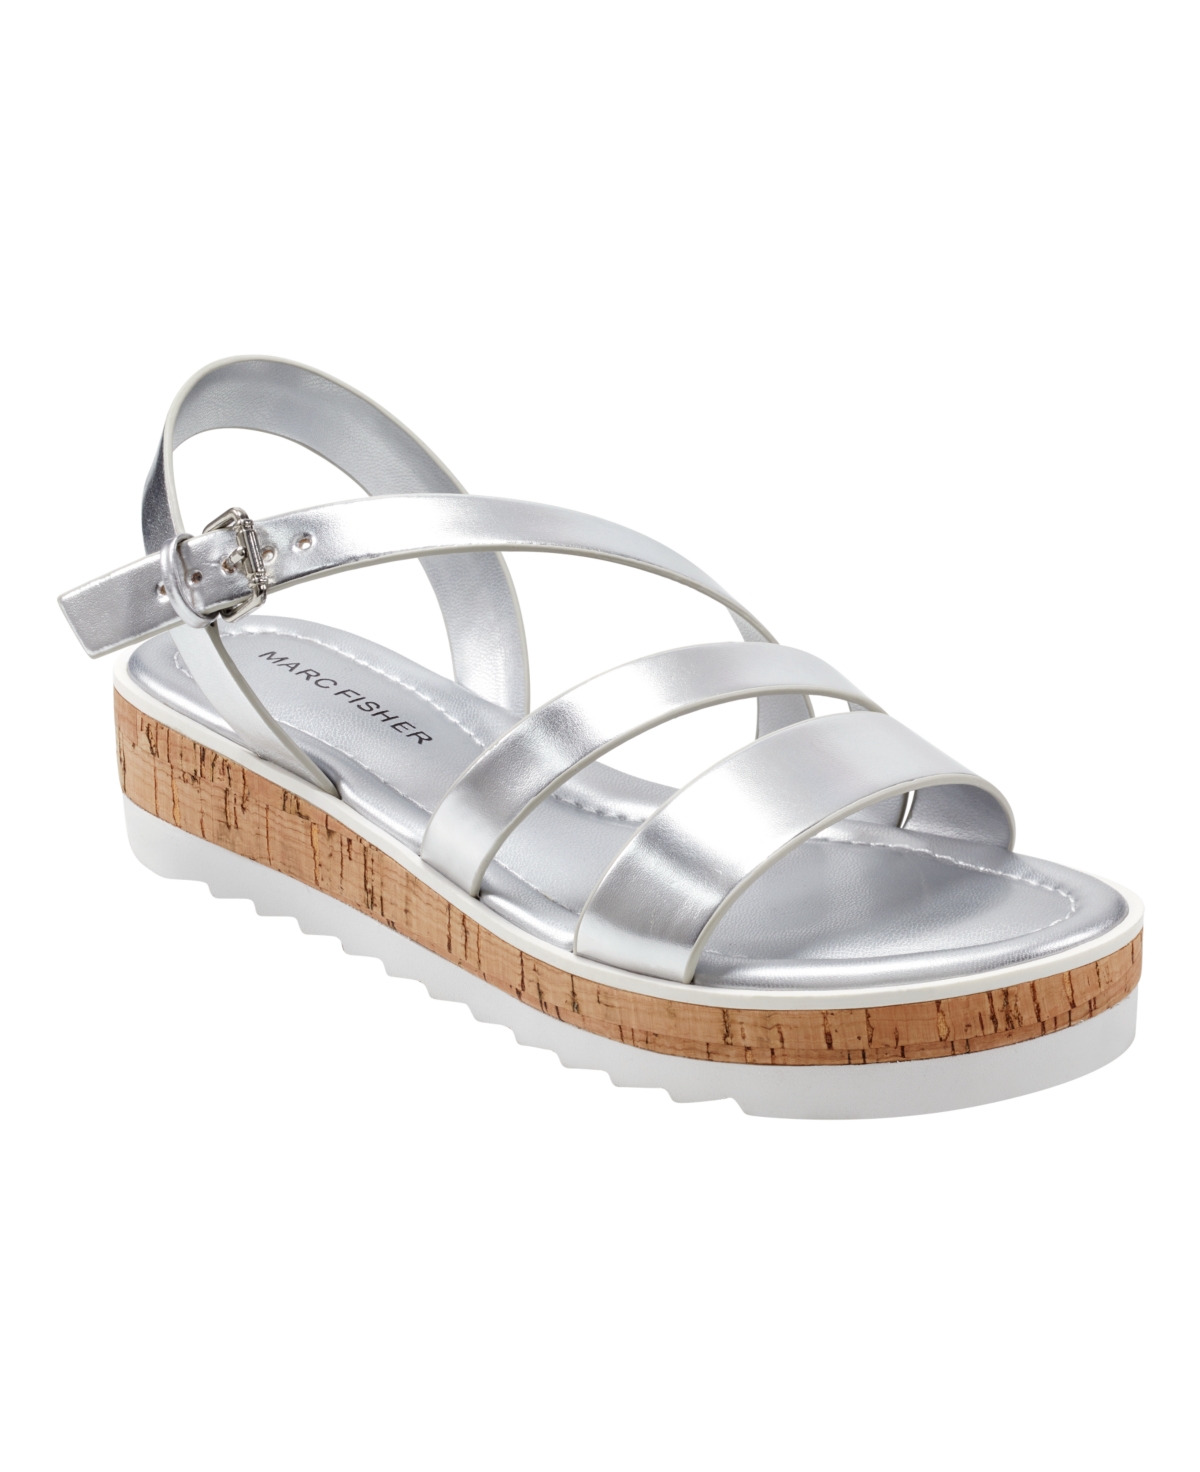 Women's Goget Strappy Open-Toe Casual Sandals - Silver